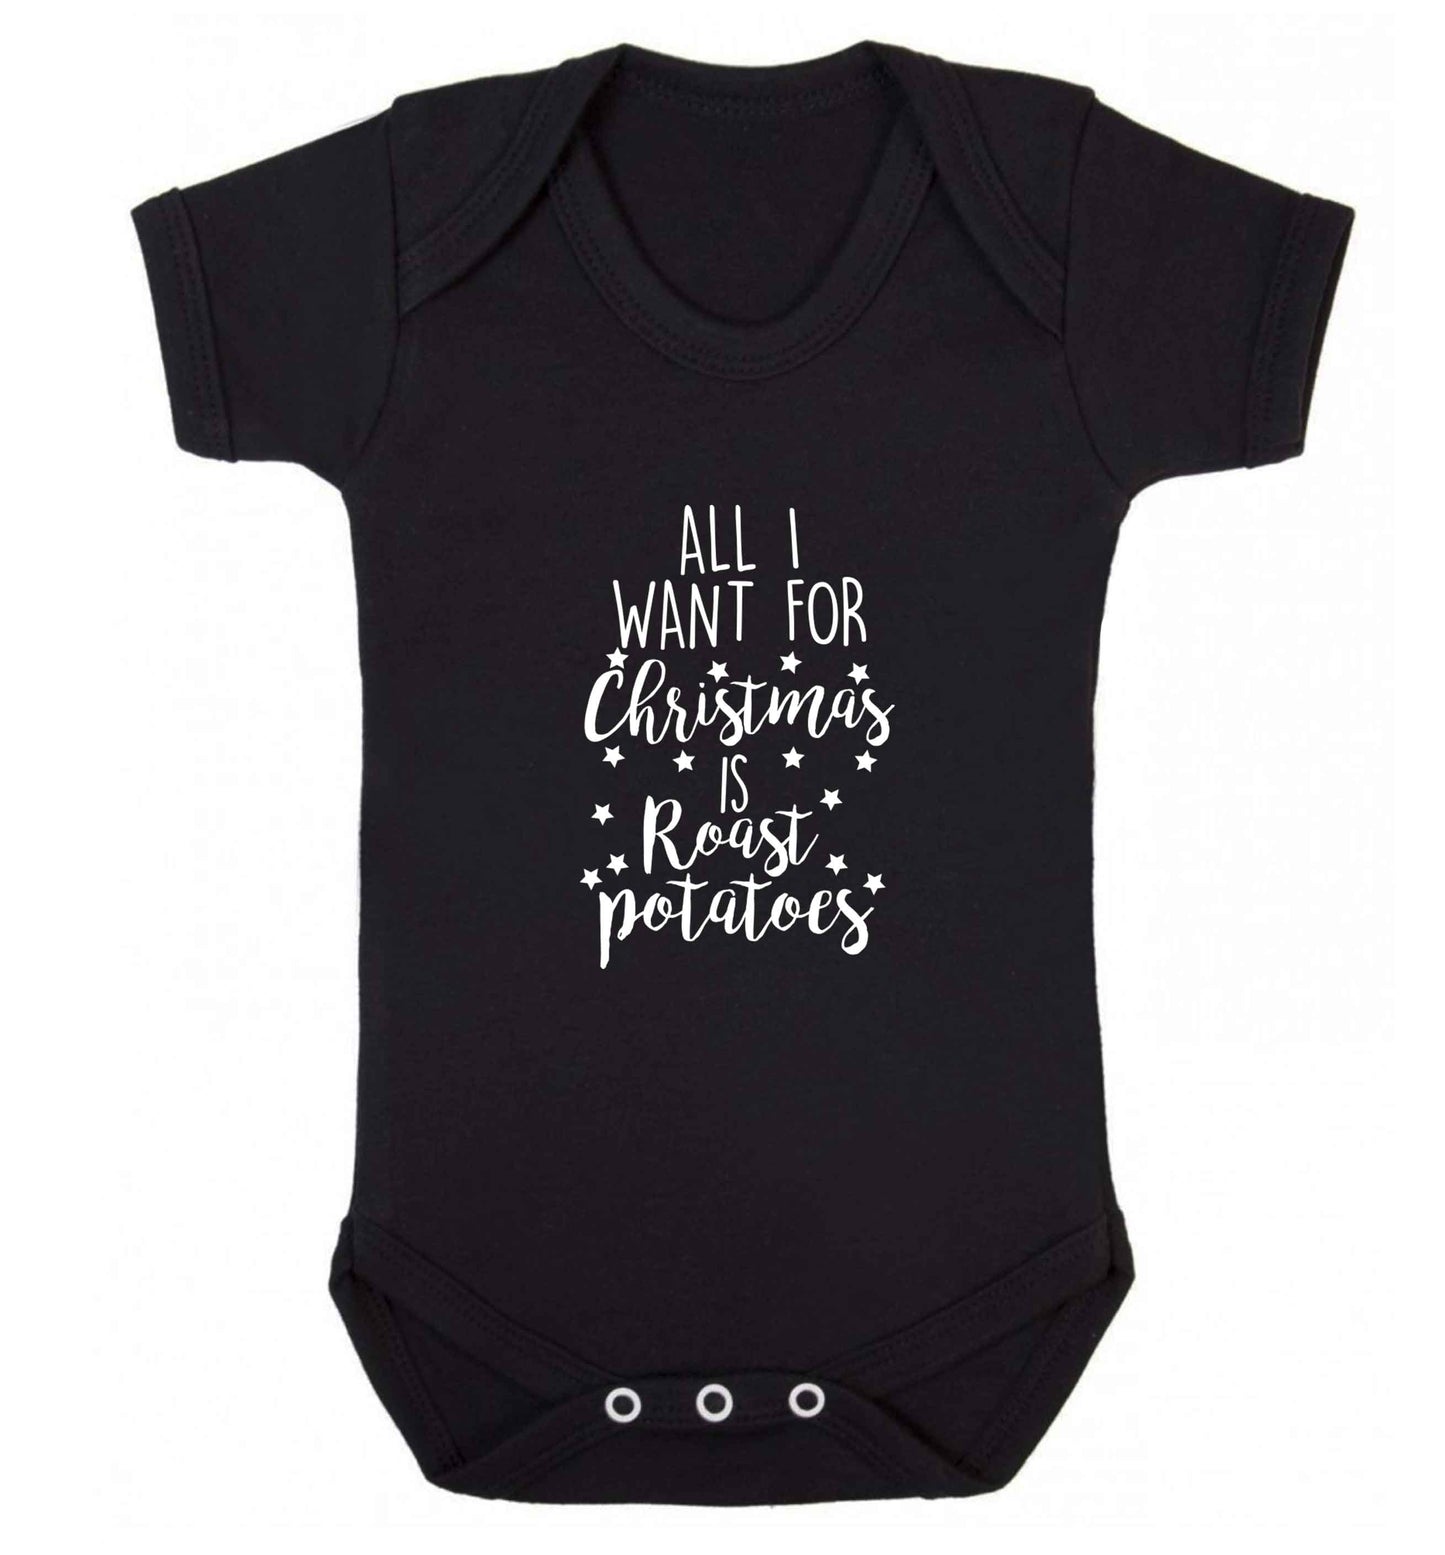 All I want for Christmas is roast potatoes baby vest black 18-24 months